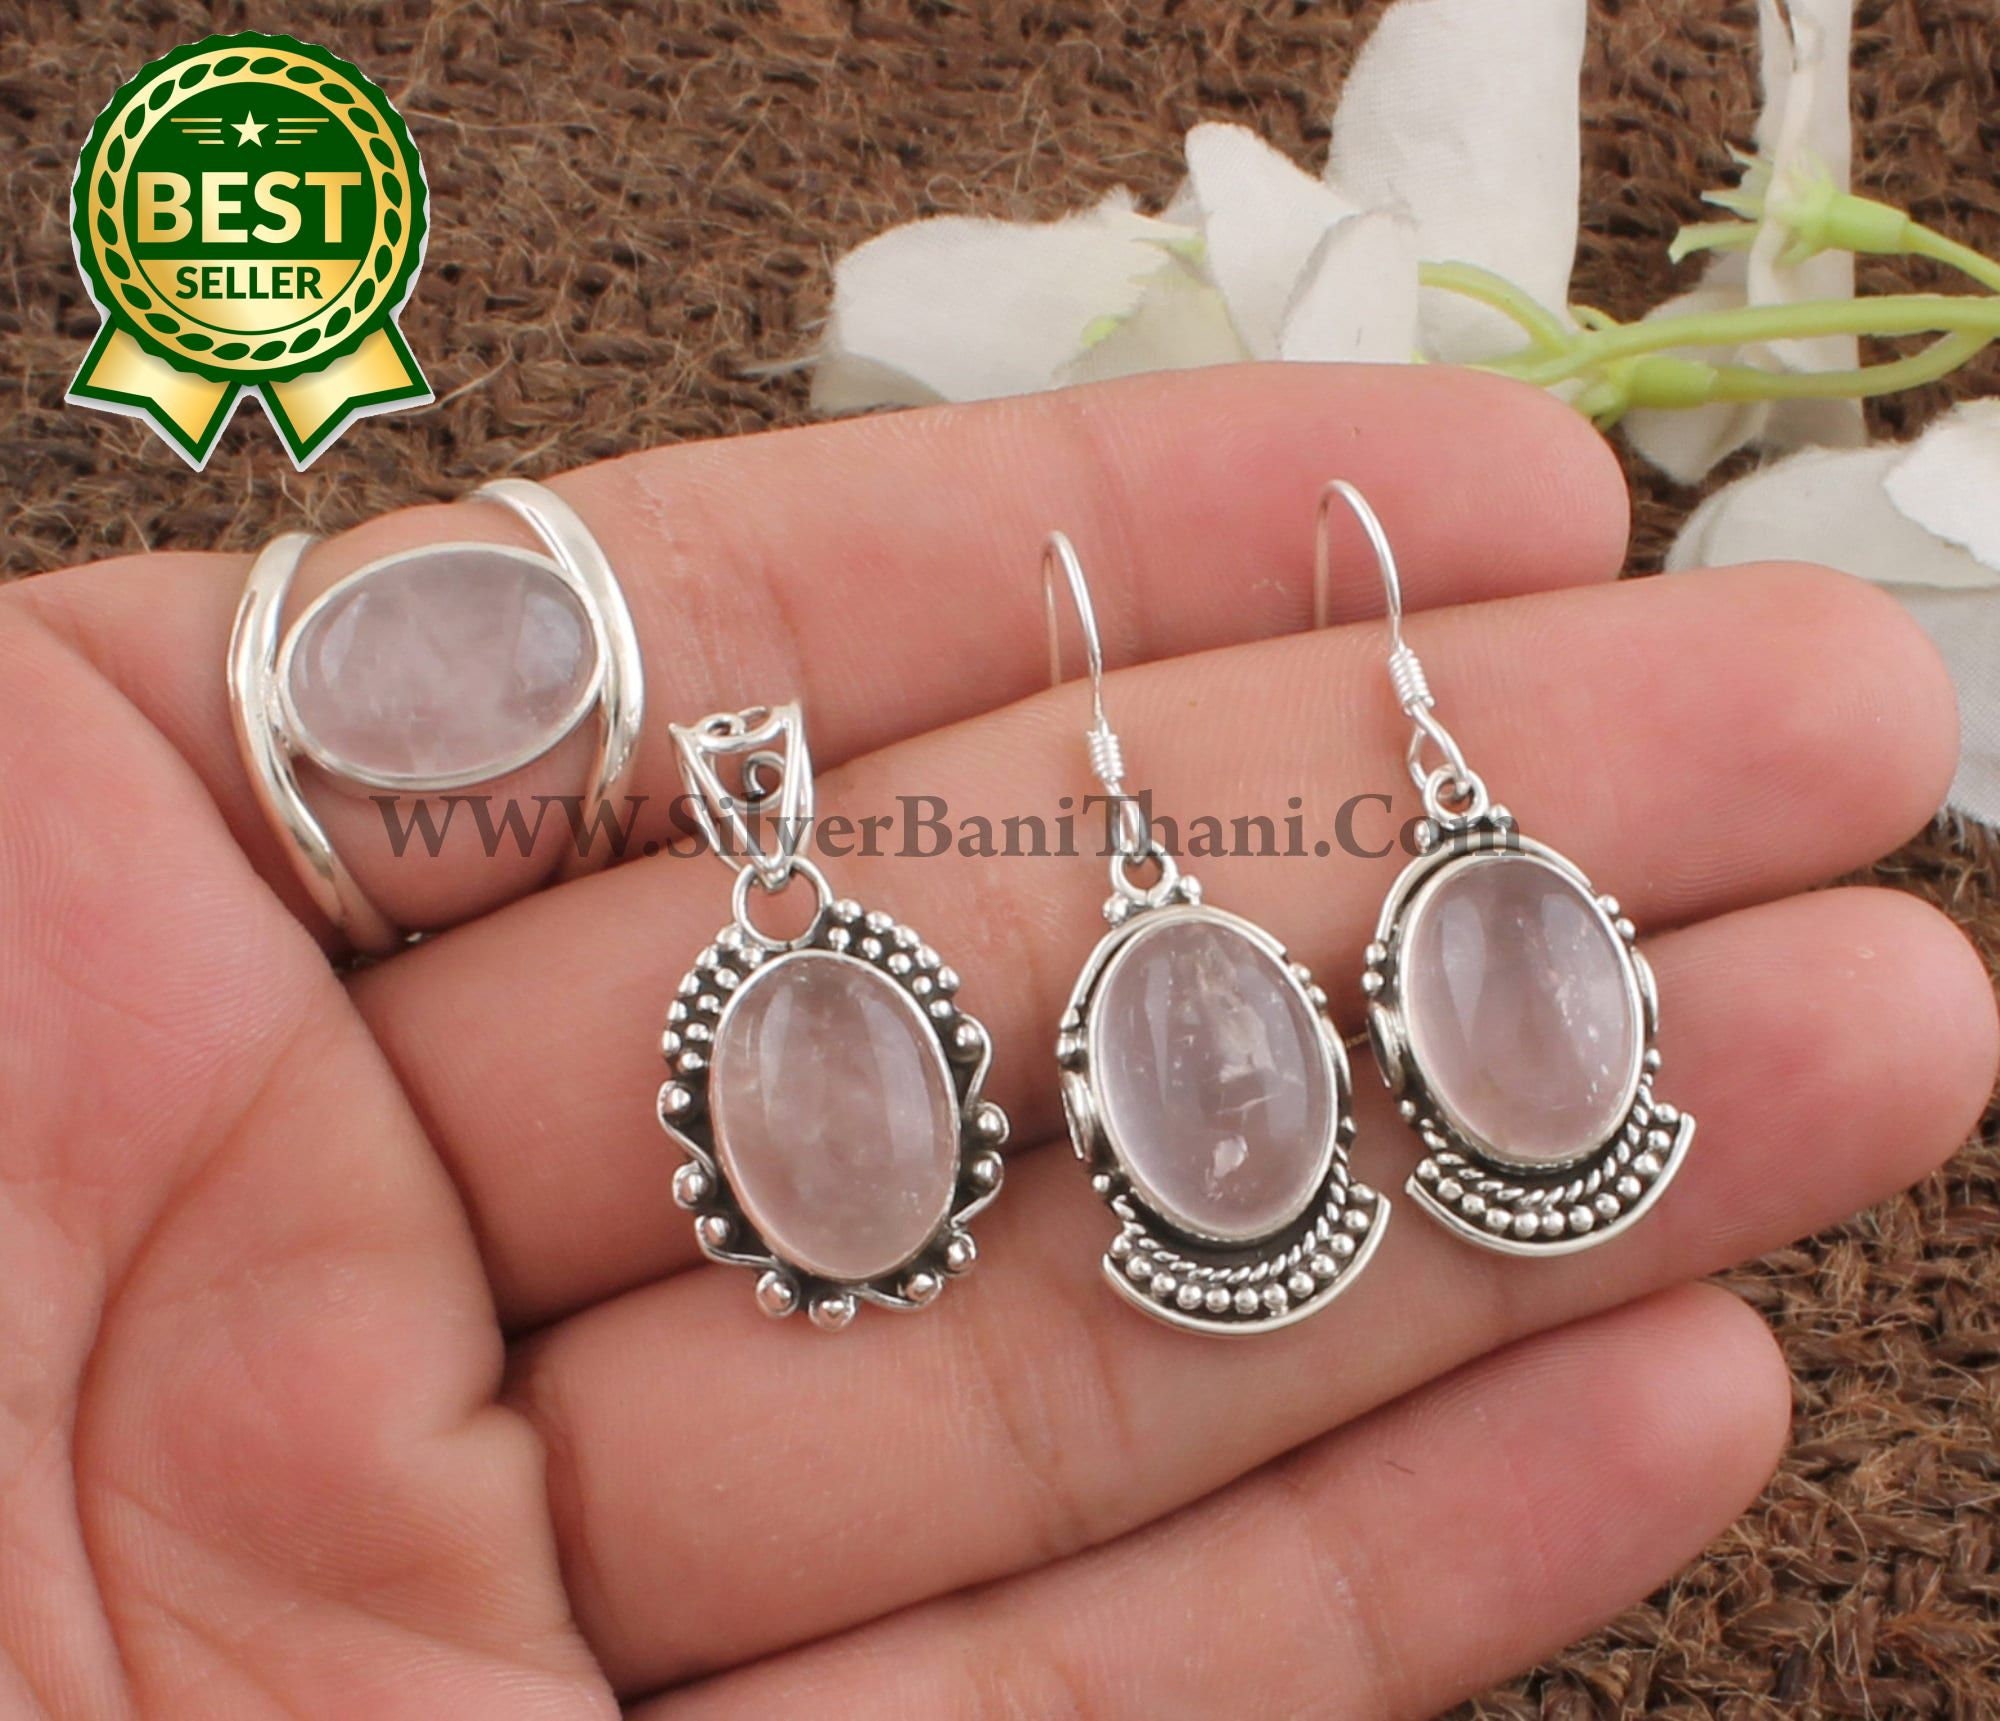 Echmeck Handmade Sterling Silver 925 Natural Oval Pink Rose Quartz 15x20mm  Stone Small Pendant Necklace 16+2 inches Chain